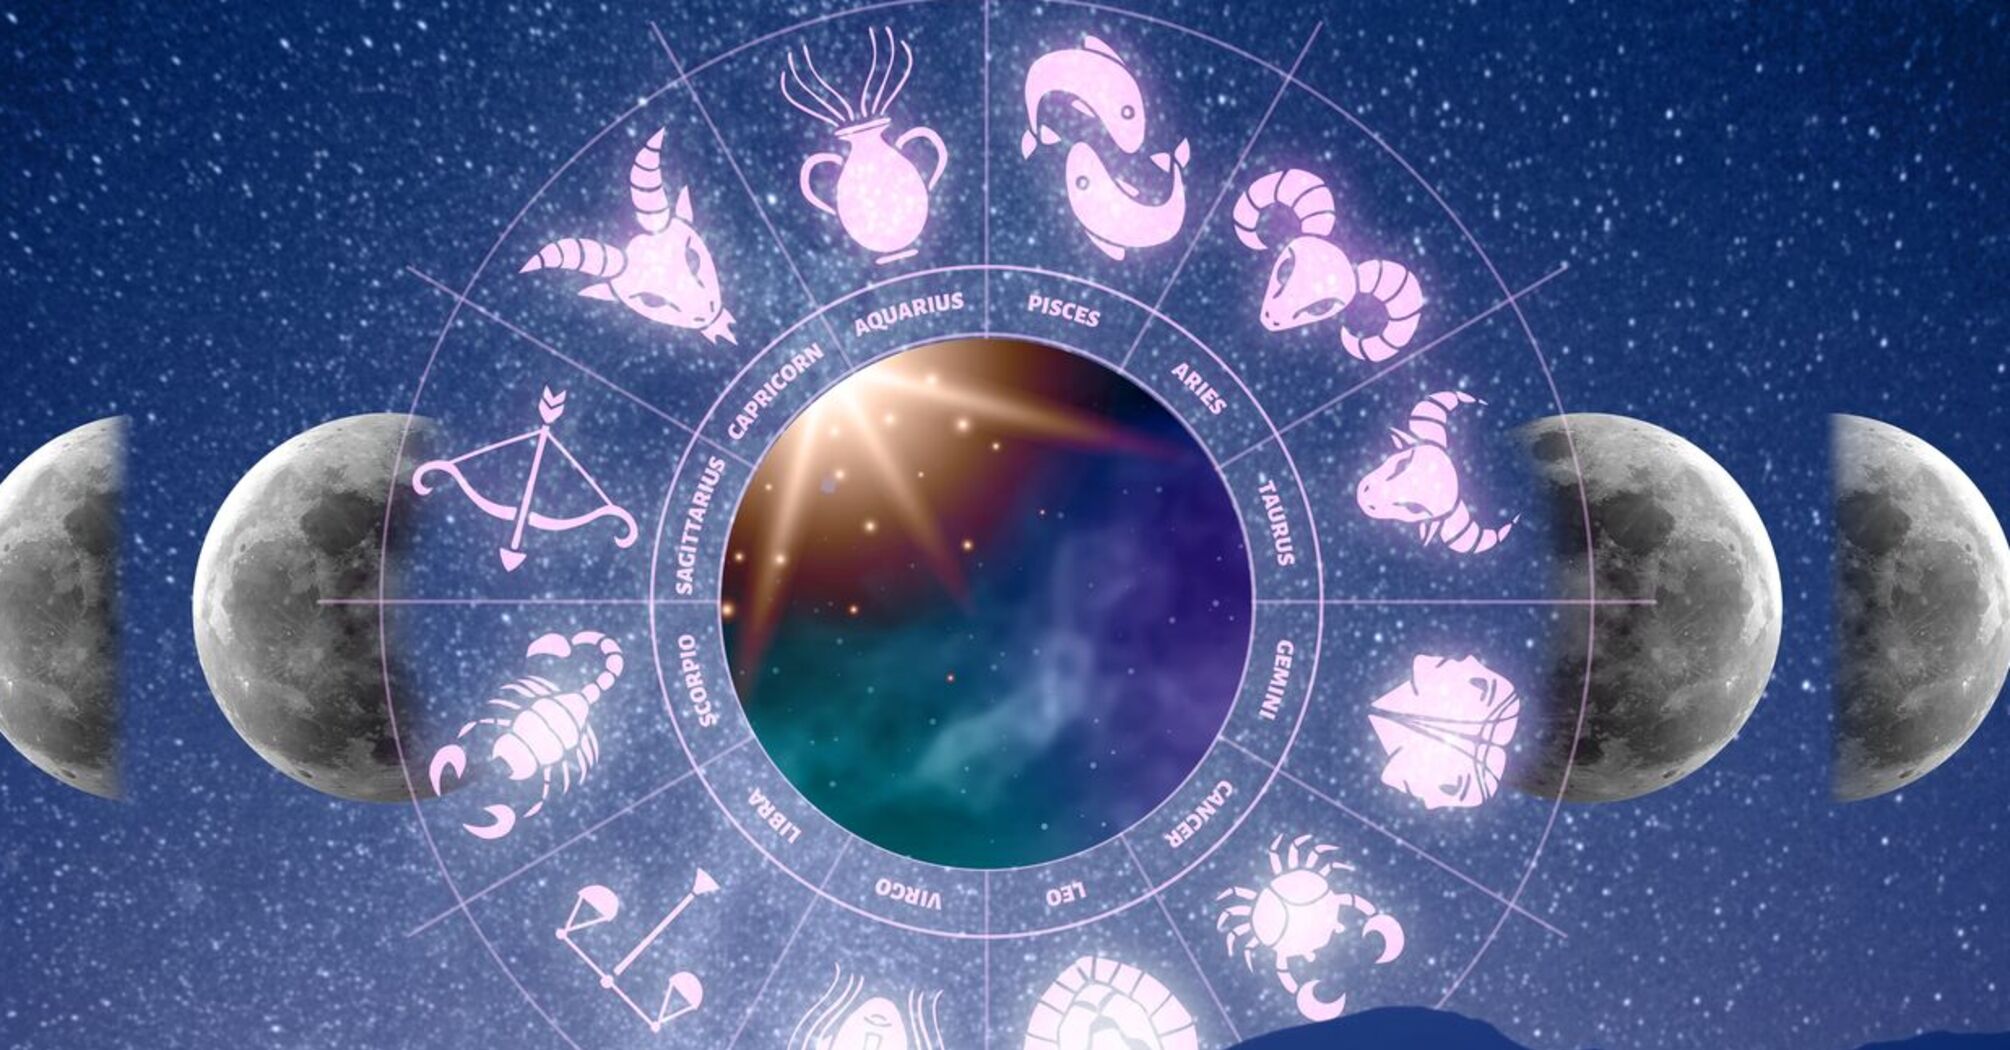 Horoscope for the 12 signs of the zodiac